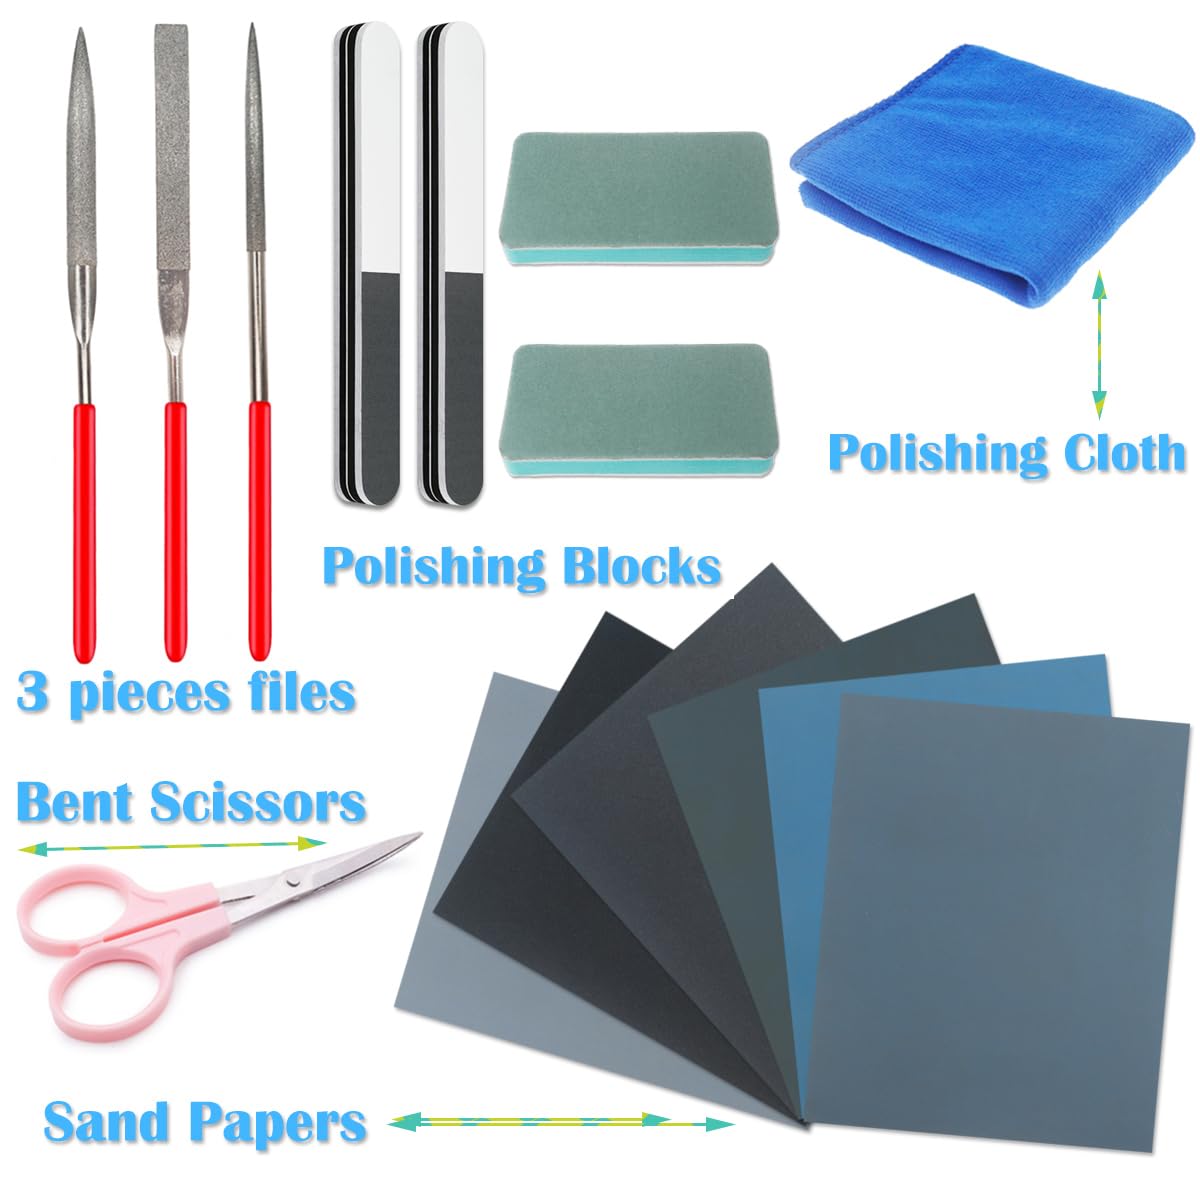 15 Pieces Resin Casting Tools Set - Include Sand Papers, Polishing Blocks, Polishing Cloth, Round File, Semicircular File, Flat File and Scissors for Polishing Epoxy Resin Jewelry Making Supplies